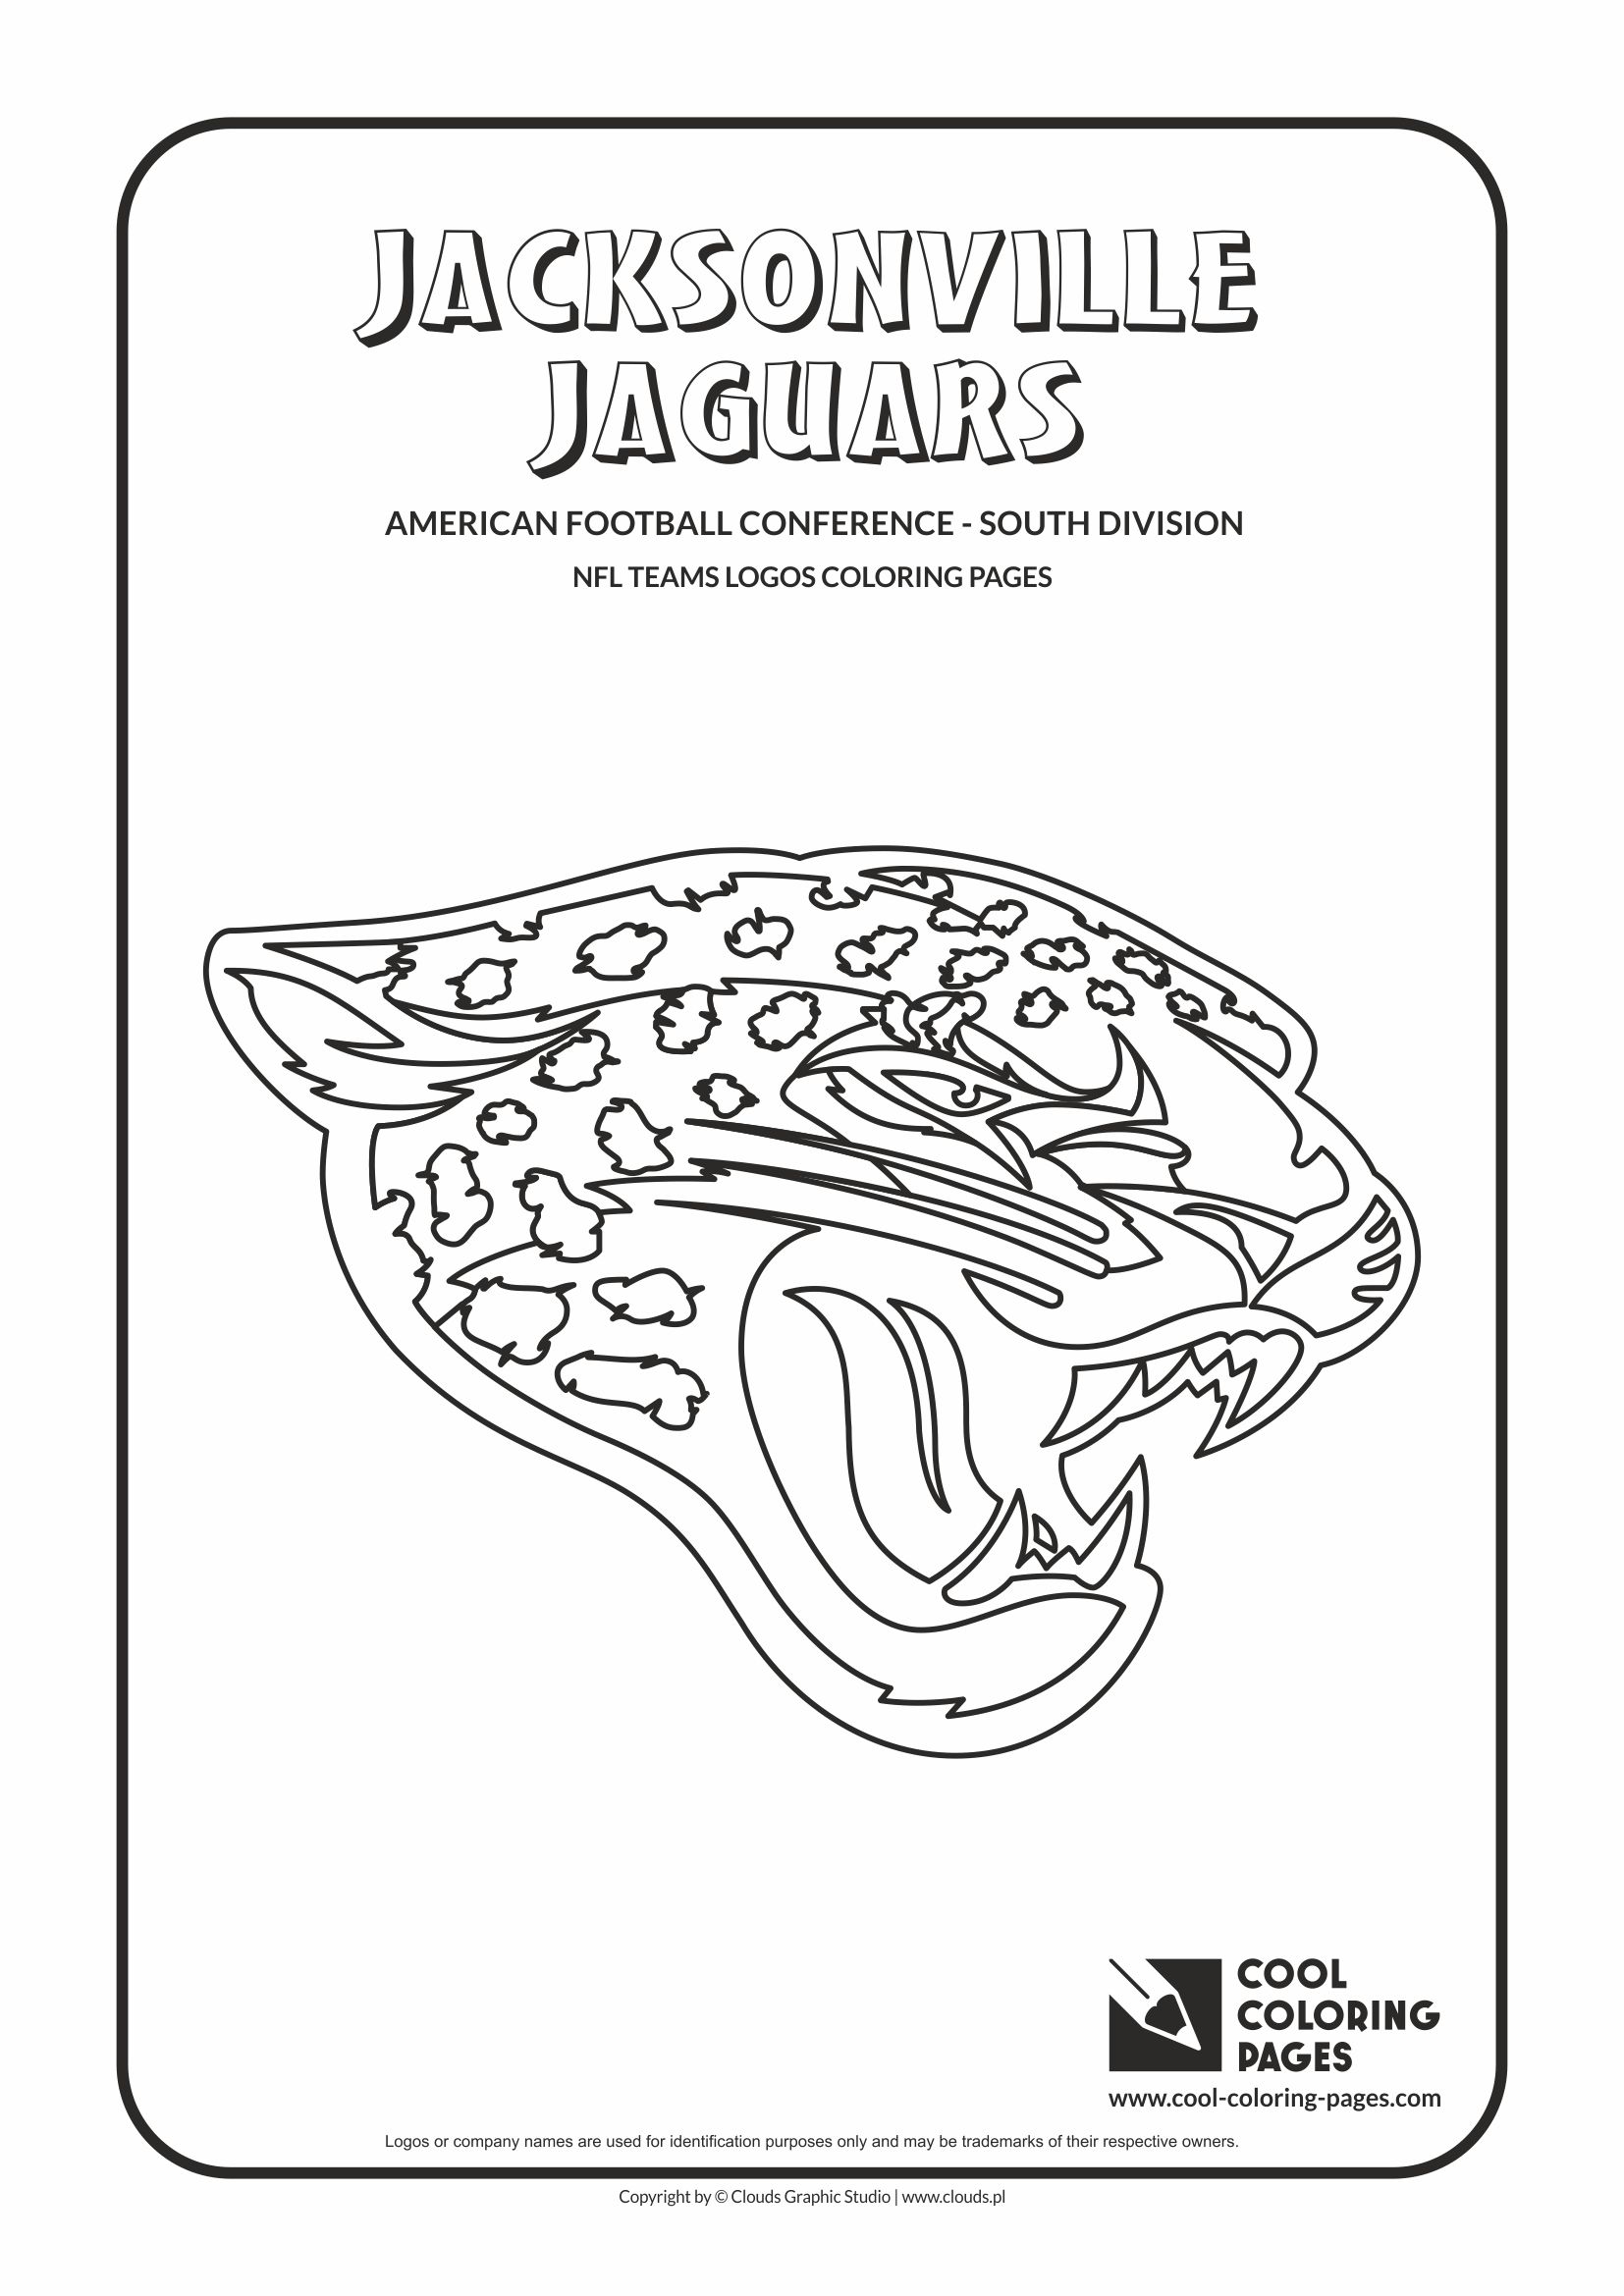 Cool Coloring Pages - NFL American Football Clubs Logos - American Football Conference - South Division / Jacksonville Jaguars logo / Coloring page with Jacksonville Jaguars logo